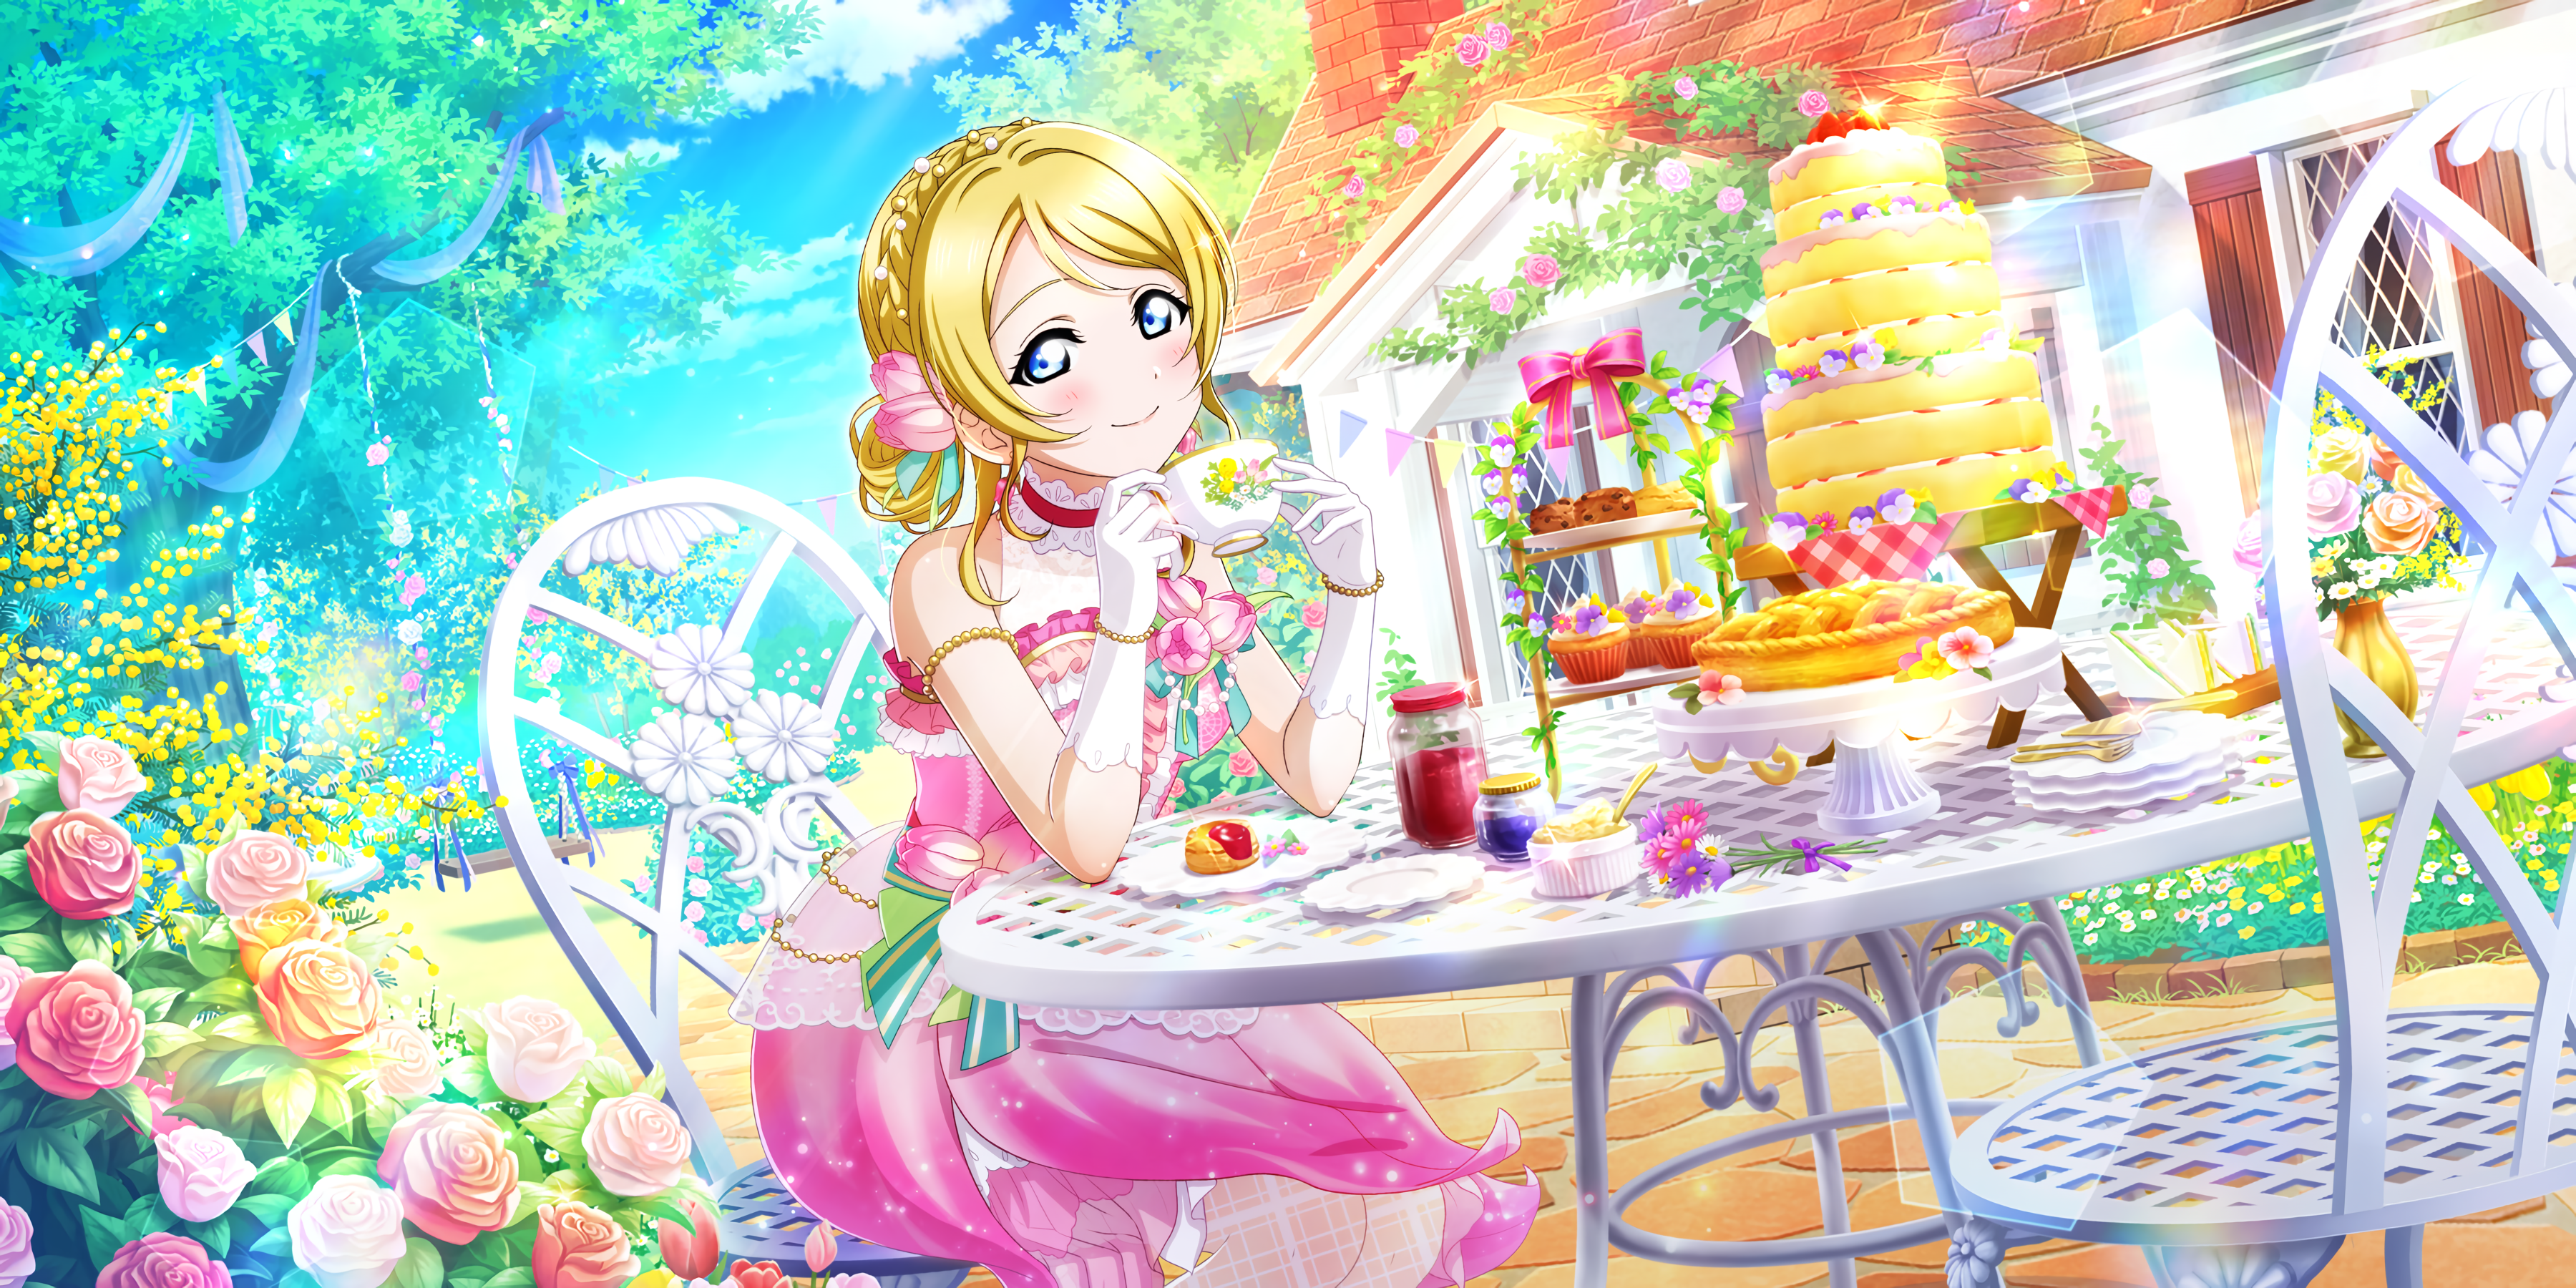 Anime 3600x1800 Ayase Eli Love Live! anime anime girls smiling blushing gloves chair flowers cup sweets cupcakes tea sunlight clouds trees looking at viewer braids dress